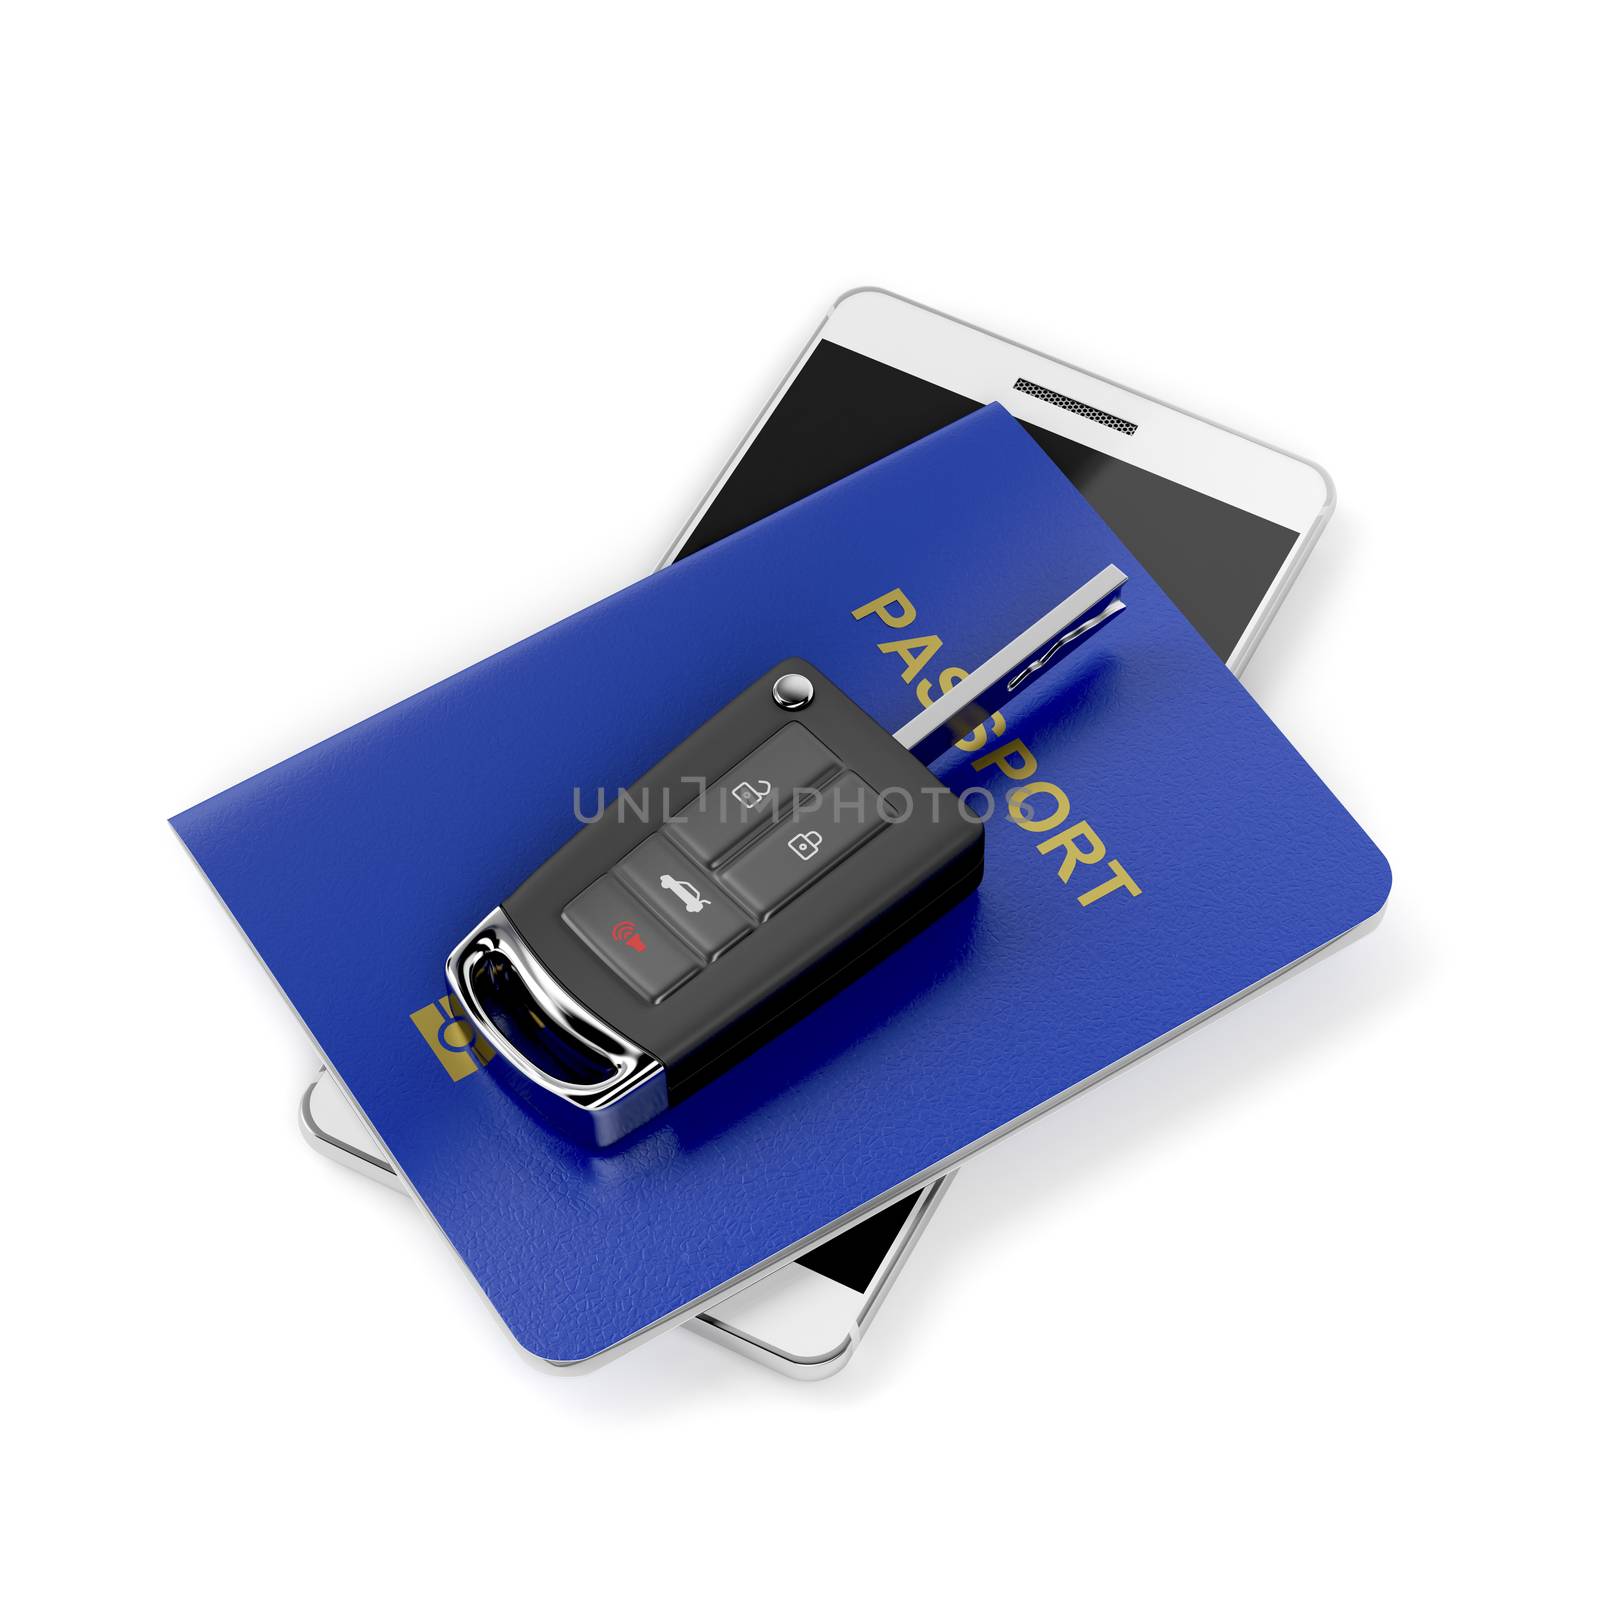 Car key, passport and smartphone by magraphics